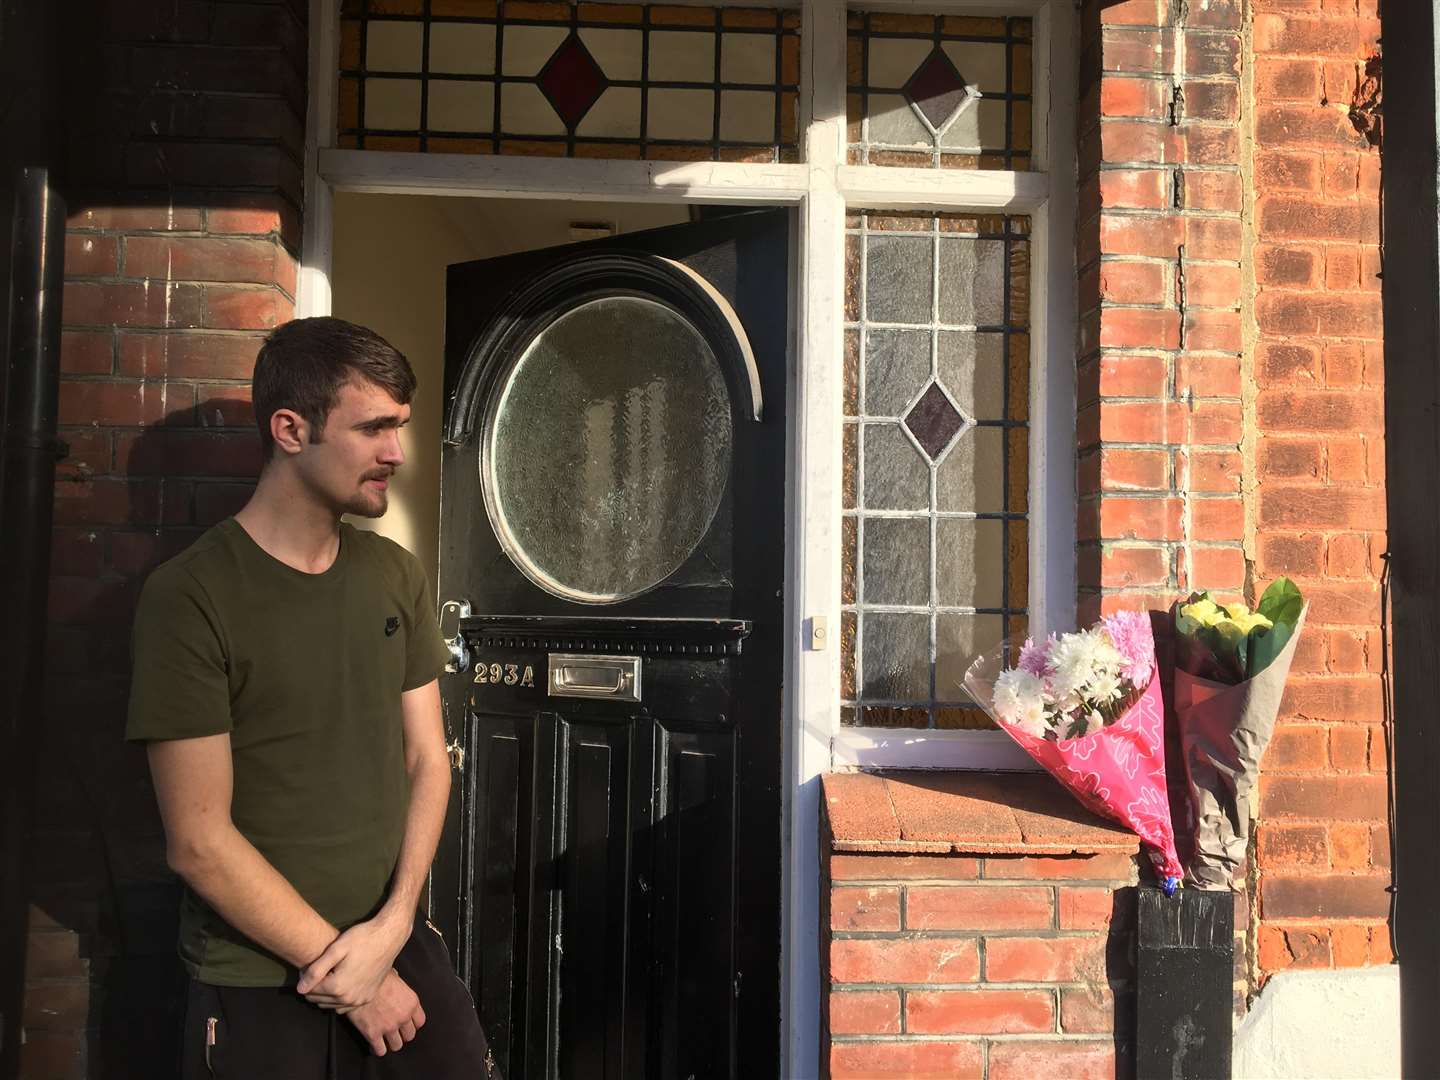 Residents of the house bought some flowers in memory of Shaun Wright